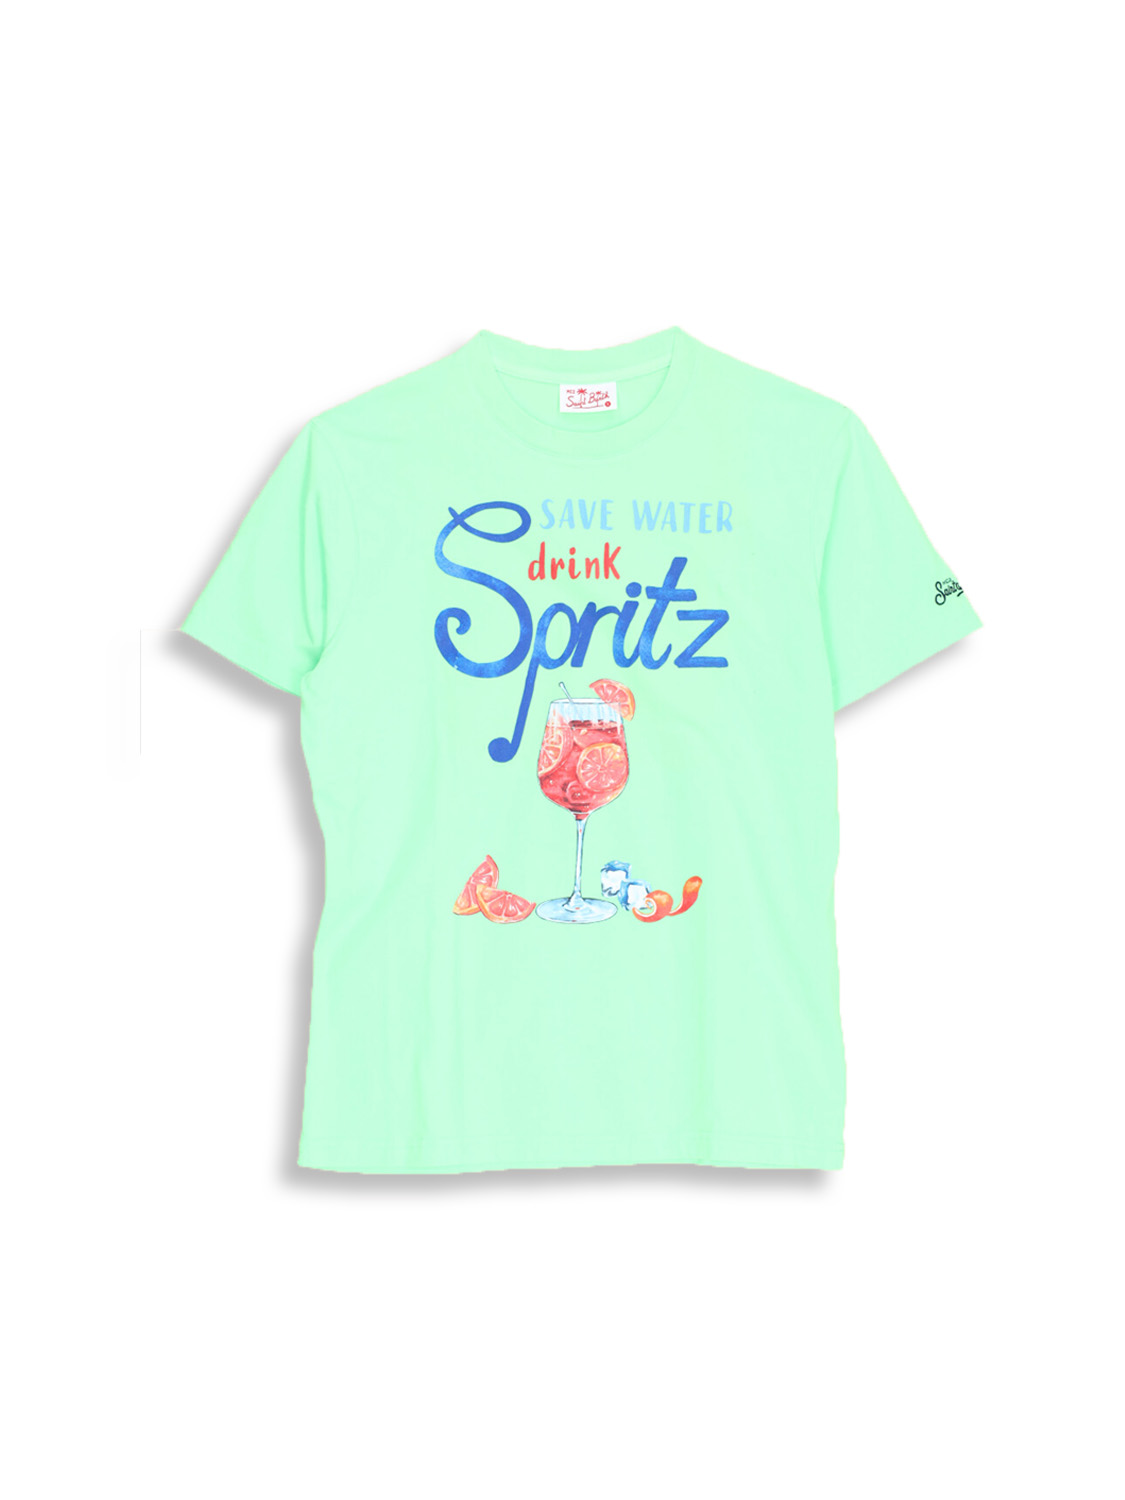 Spritz - Graphic T-shirt with crew neck is made of cotton